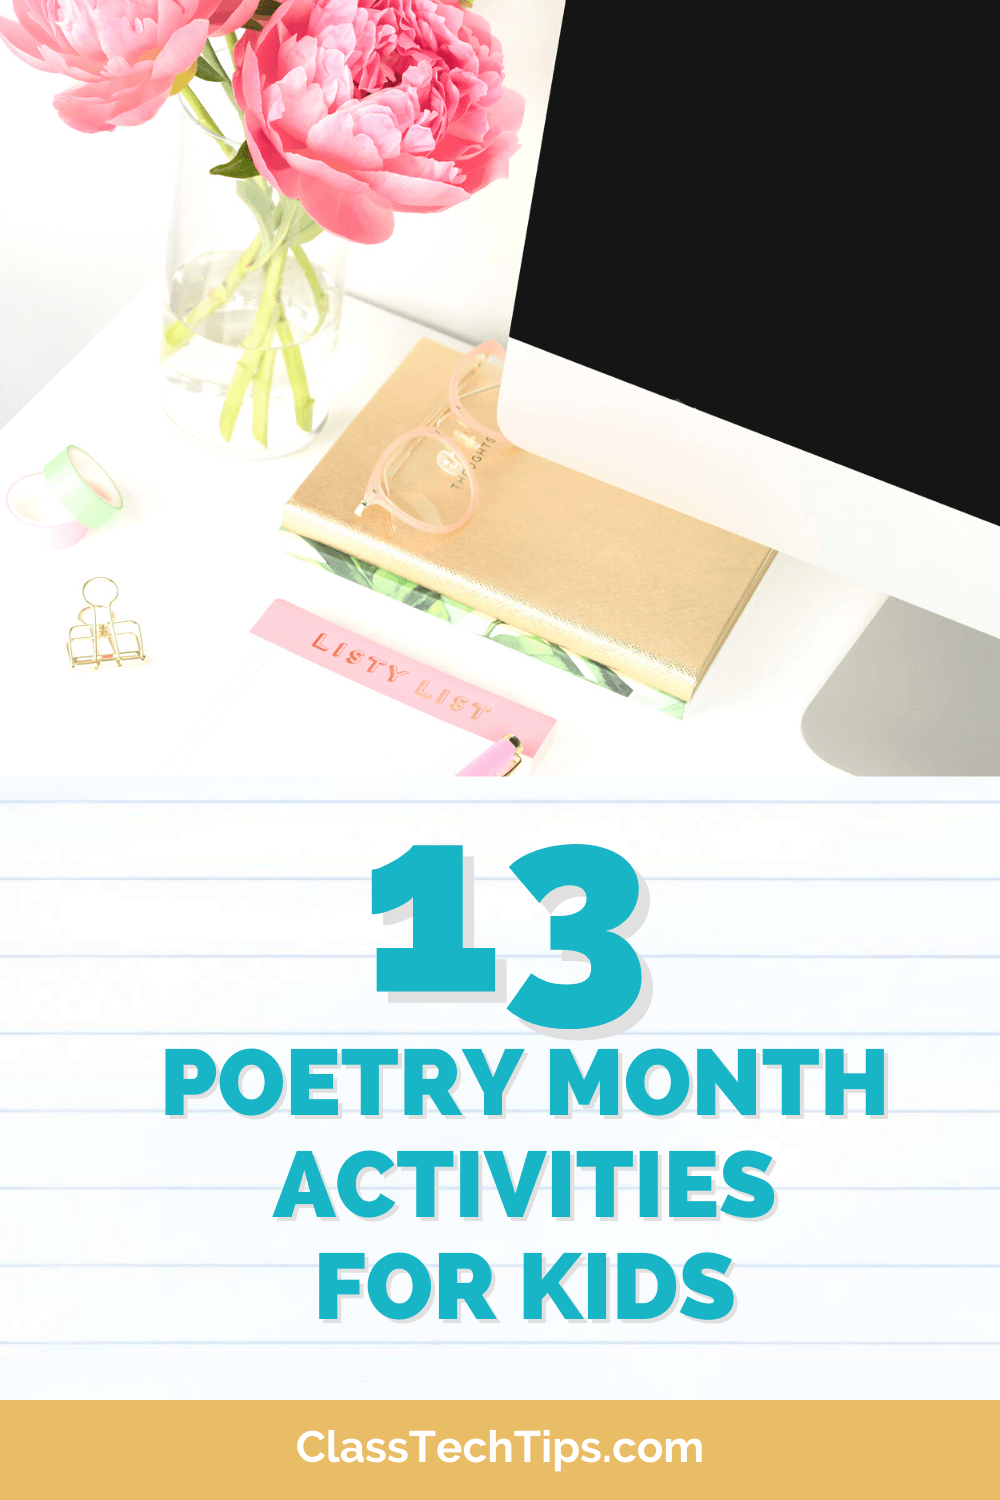 A colorful blog post featured image promoting "13 Poetry Month Activities for Kids" with a clear and bright backdrop. The setting includes a desk with a pink peony bouquet in a clear vase, a gold notebook, pale green washi tape, clear eyeglasses, and a pink sticky note with "Listy List" written on it. A computer monitor with a blank screen looms in the background, emphasizing the educational content found at ClassTechTips.com.